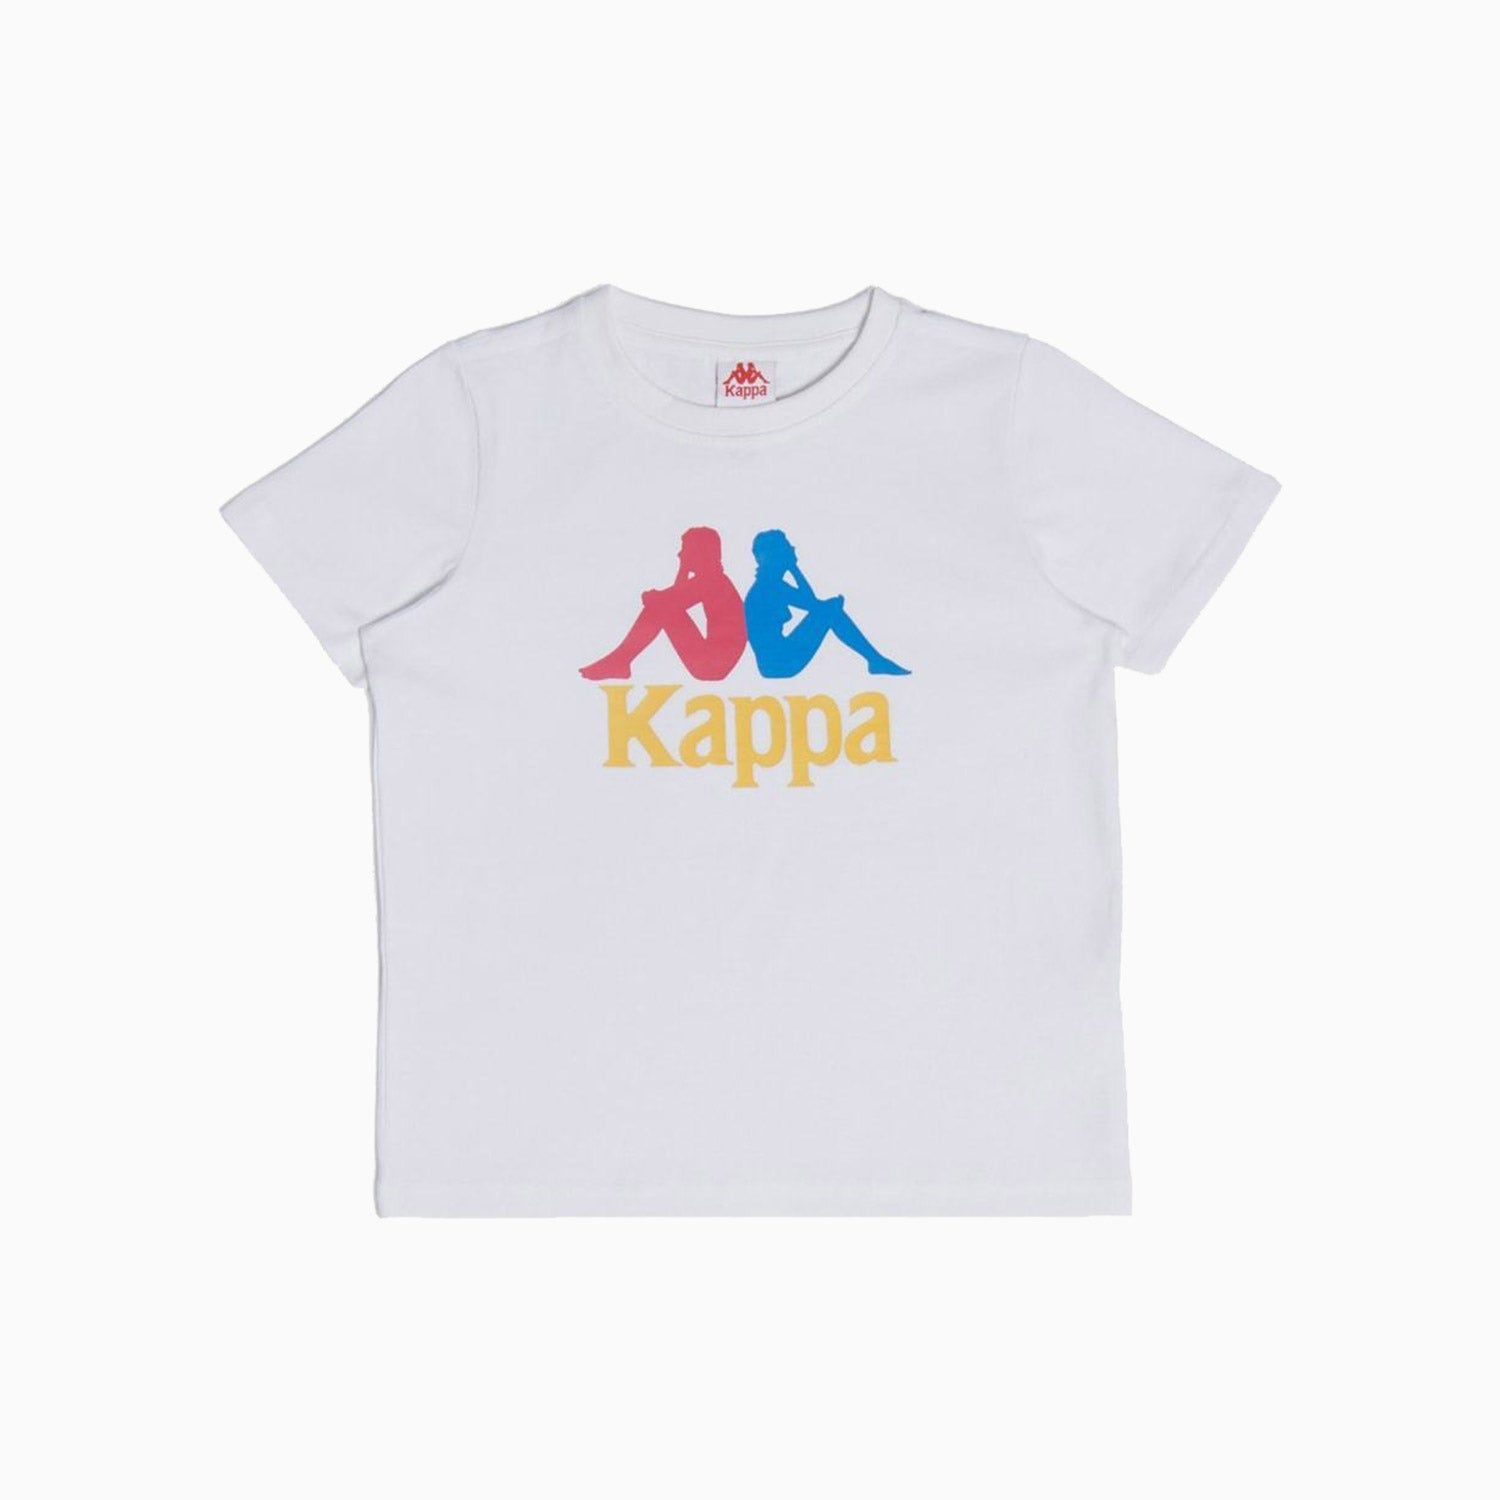 Kappa Kid's Authentic Estessi Outfit - Color: WHITE BLUE ASTER YELLOW - Kids Premium Clothing -